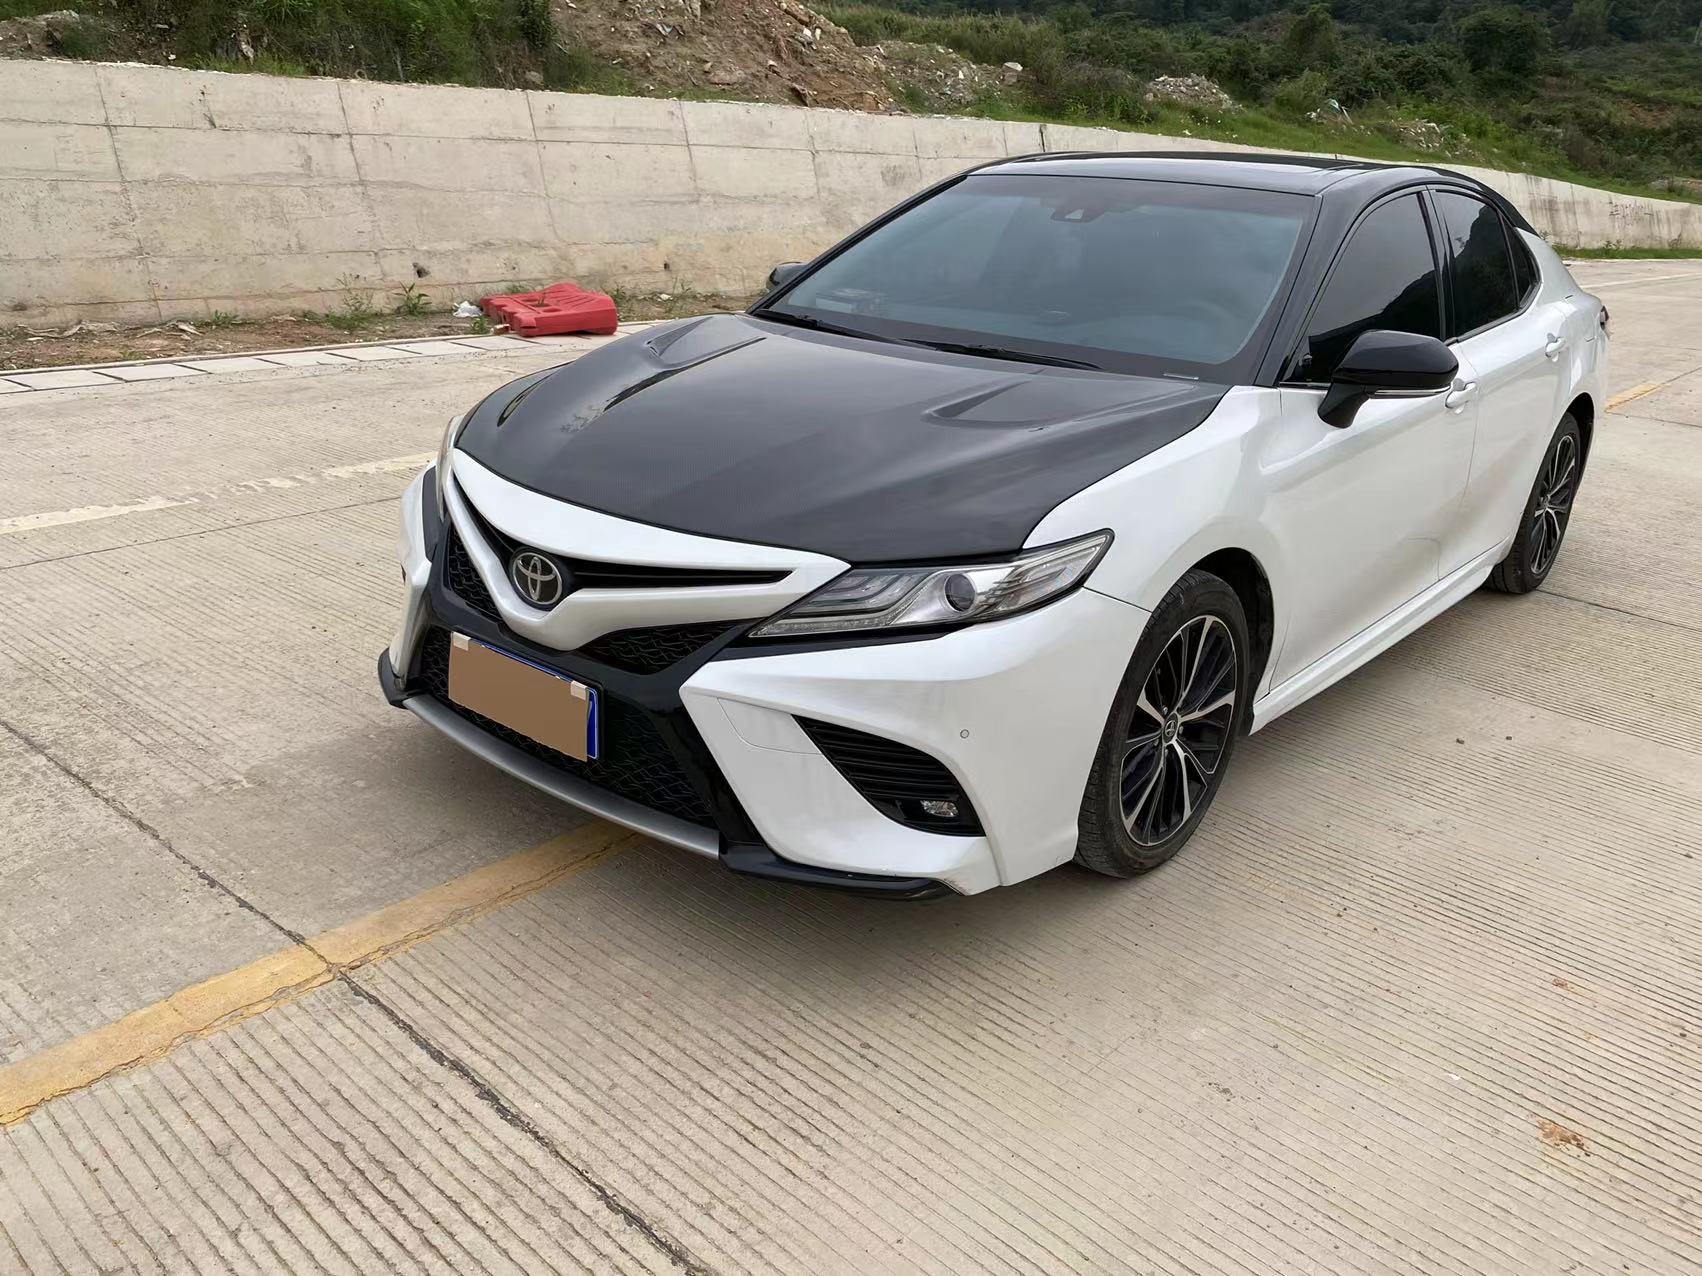 Toyota Camry XV70 2017-ON with EPR's aftermarket parts - Carbon Fiber EV1 Type vented hood